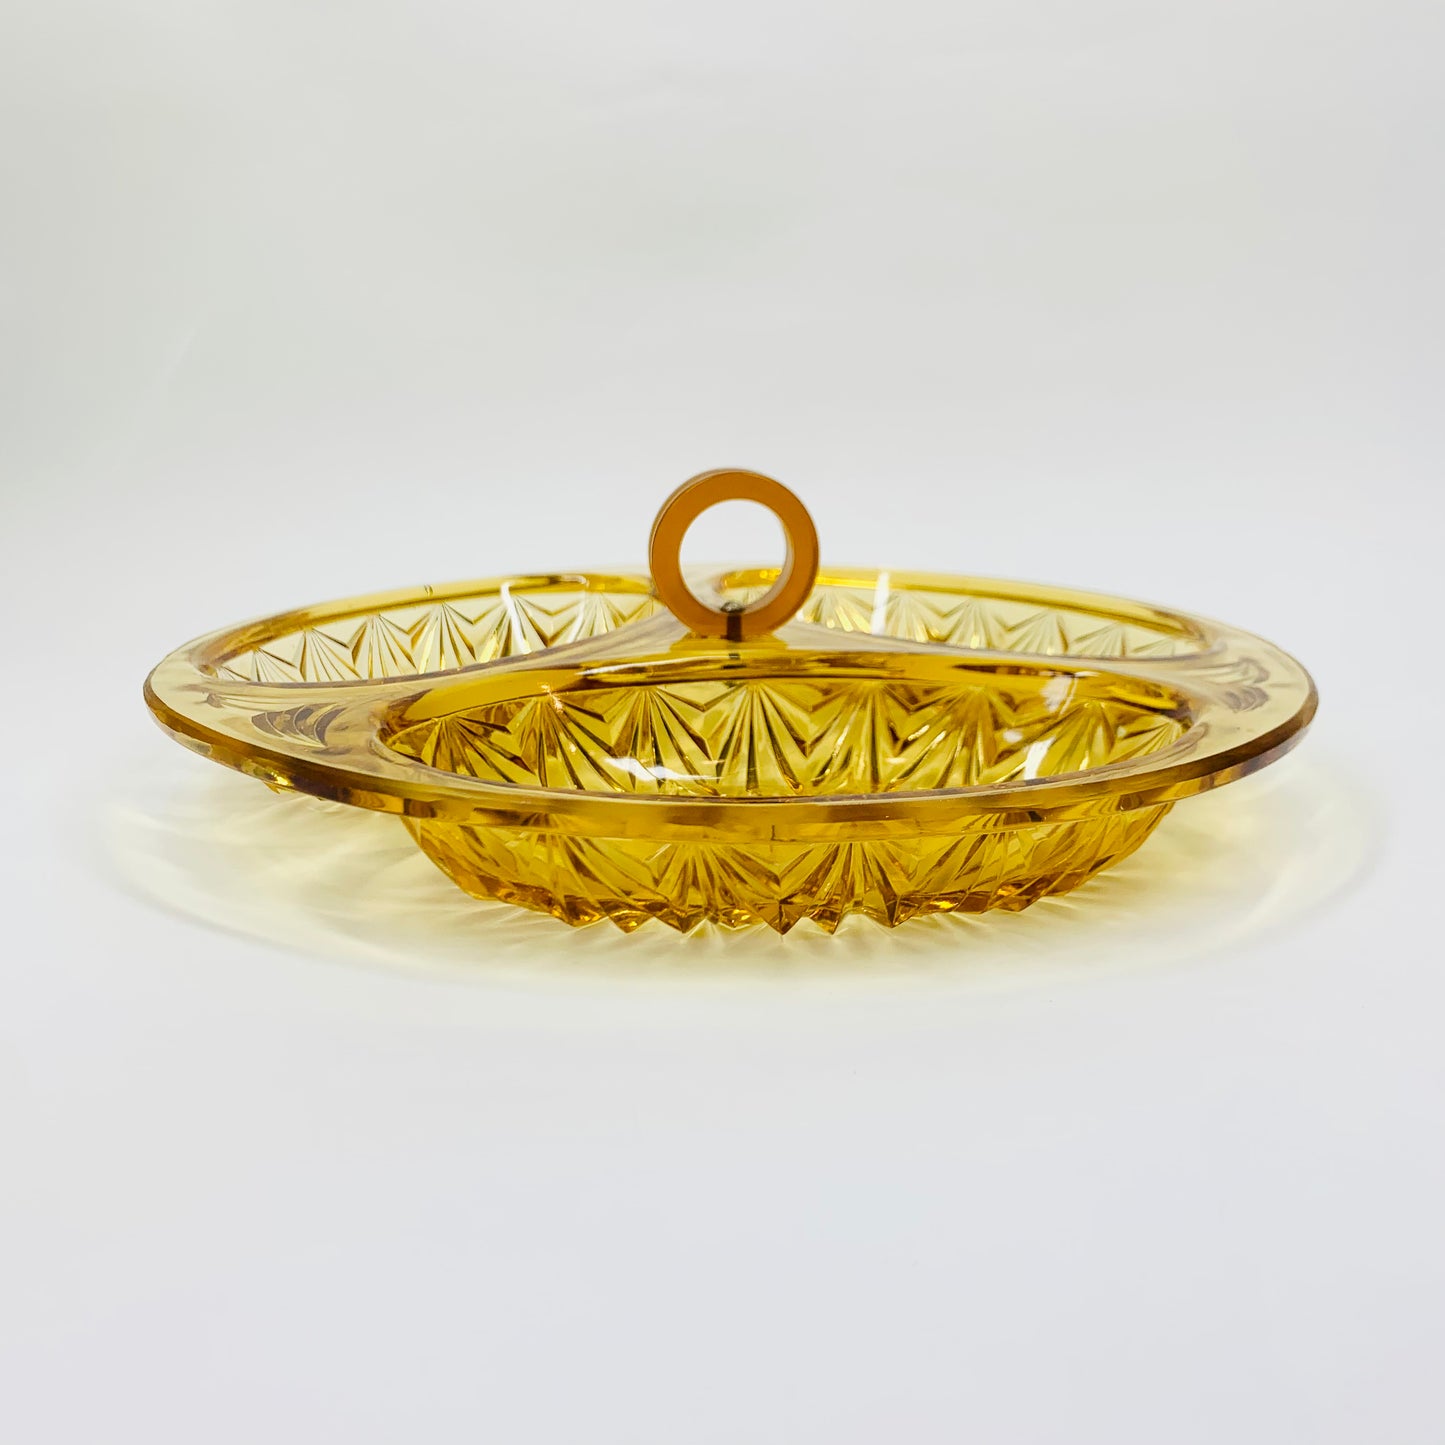 Midcentury pressed amber glass square serving plate with handle